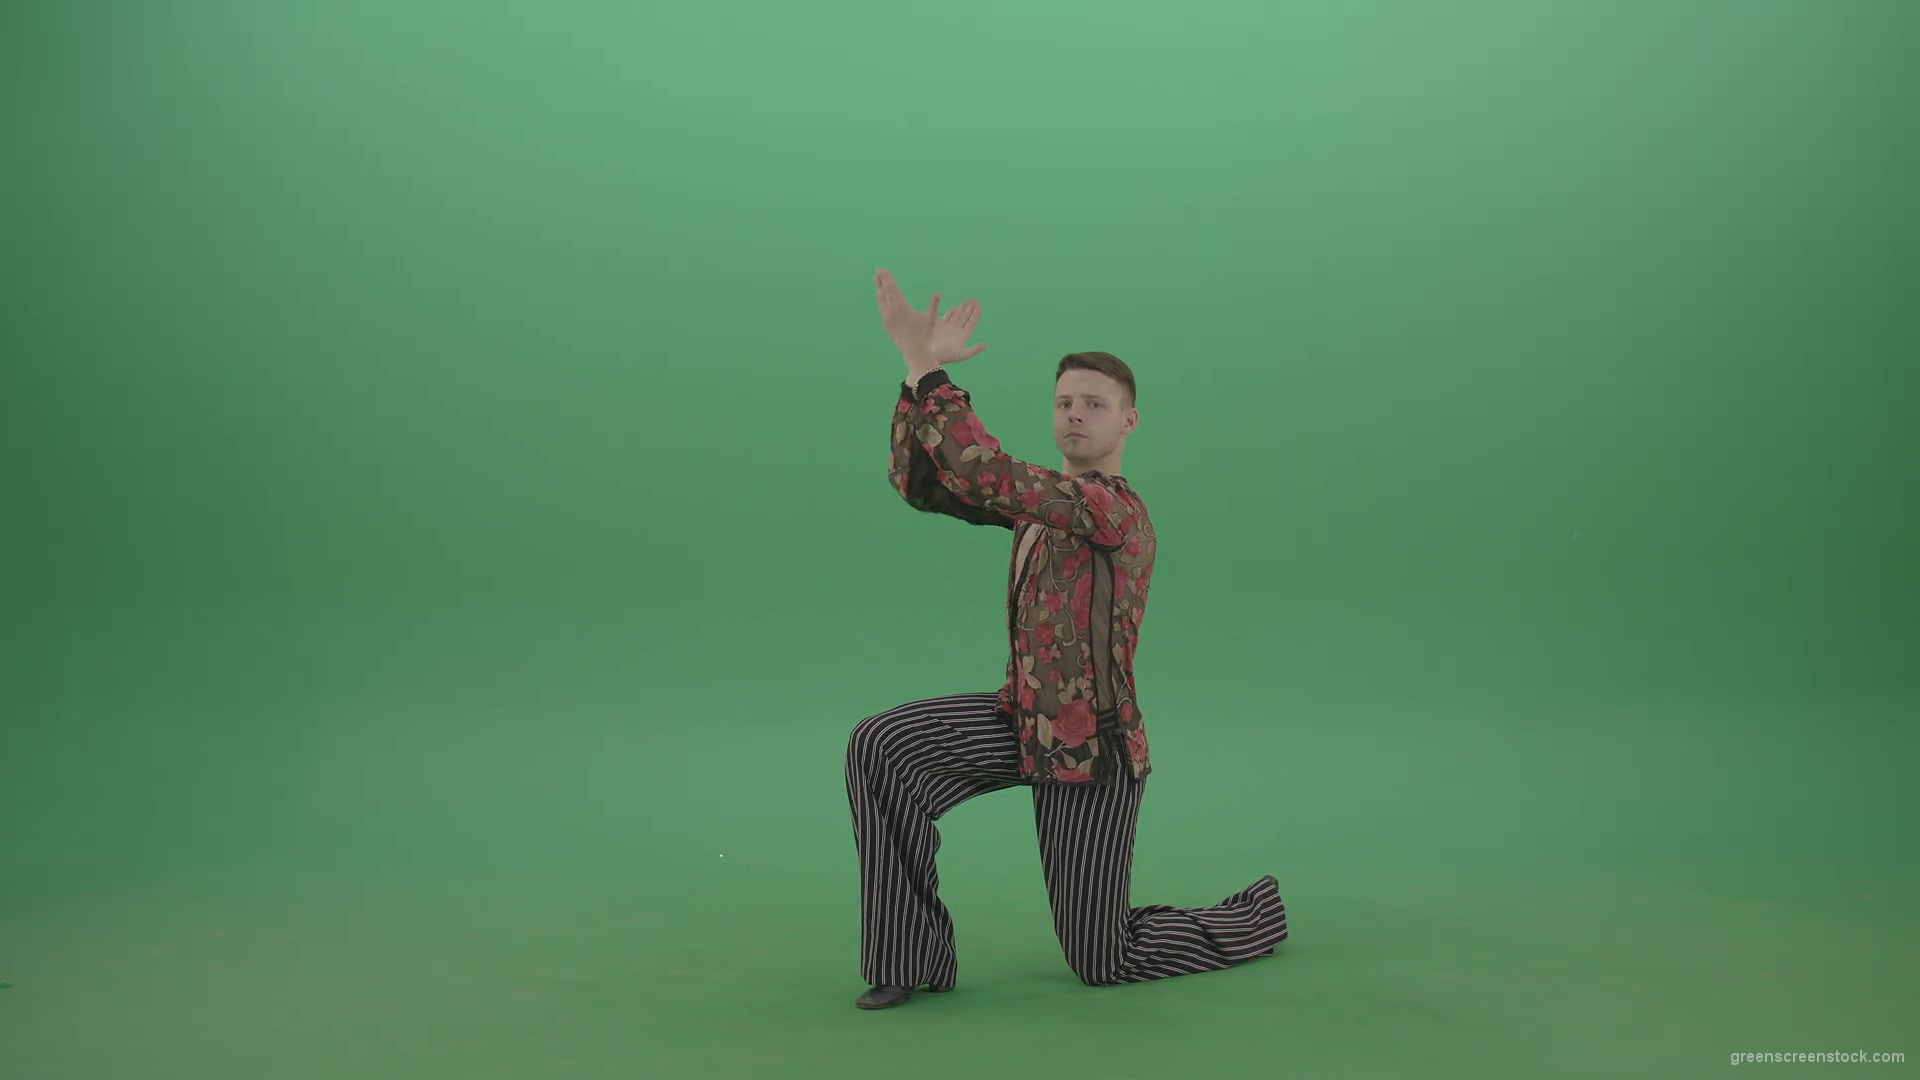 Rumba-Man-get-down-on-one-knees-and-clapping-in-hands-over-green-screen-4K-Video-Footage--1920_005 Green Screen Stock